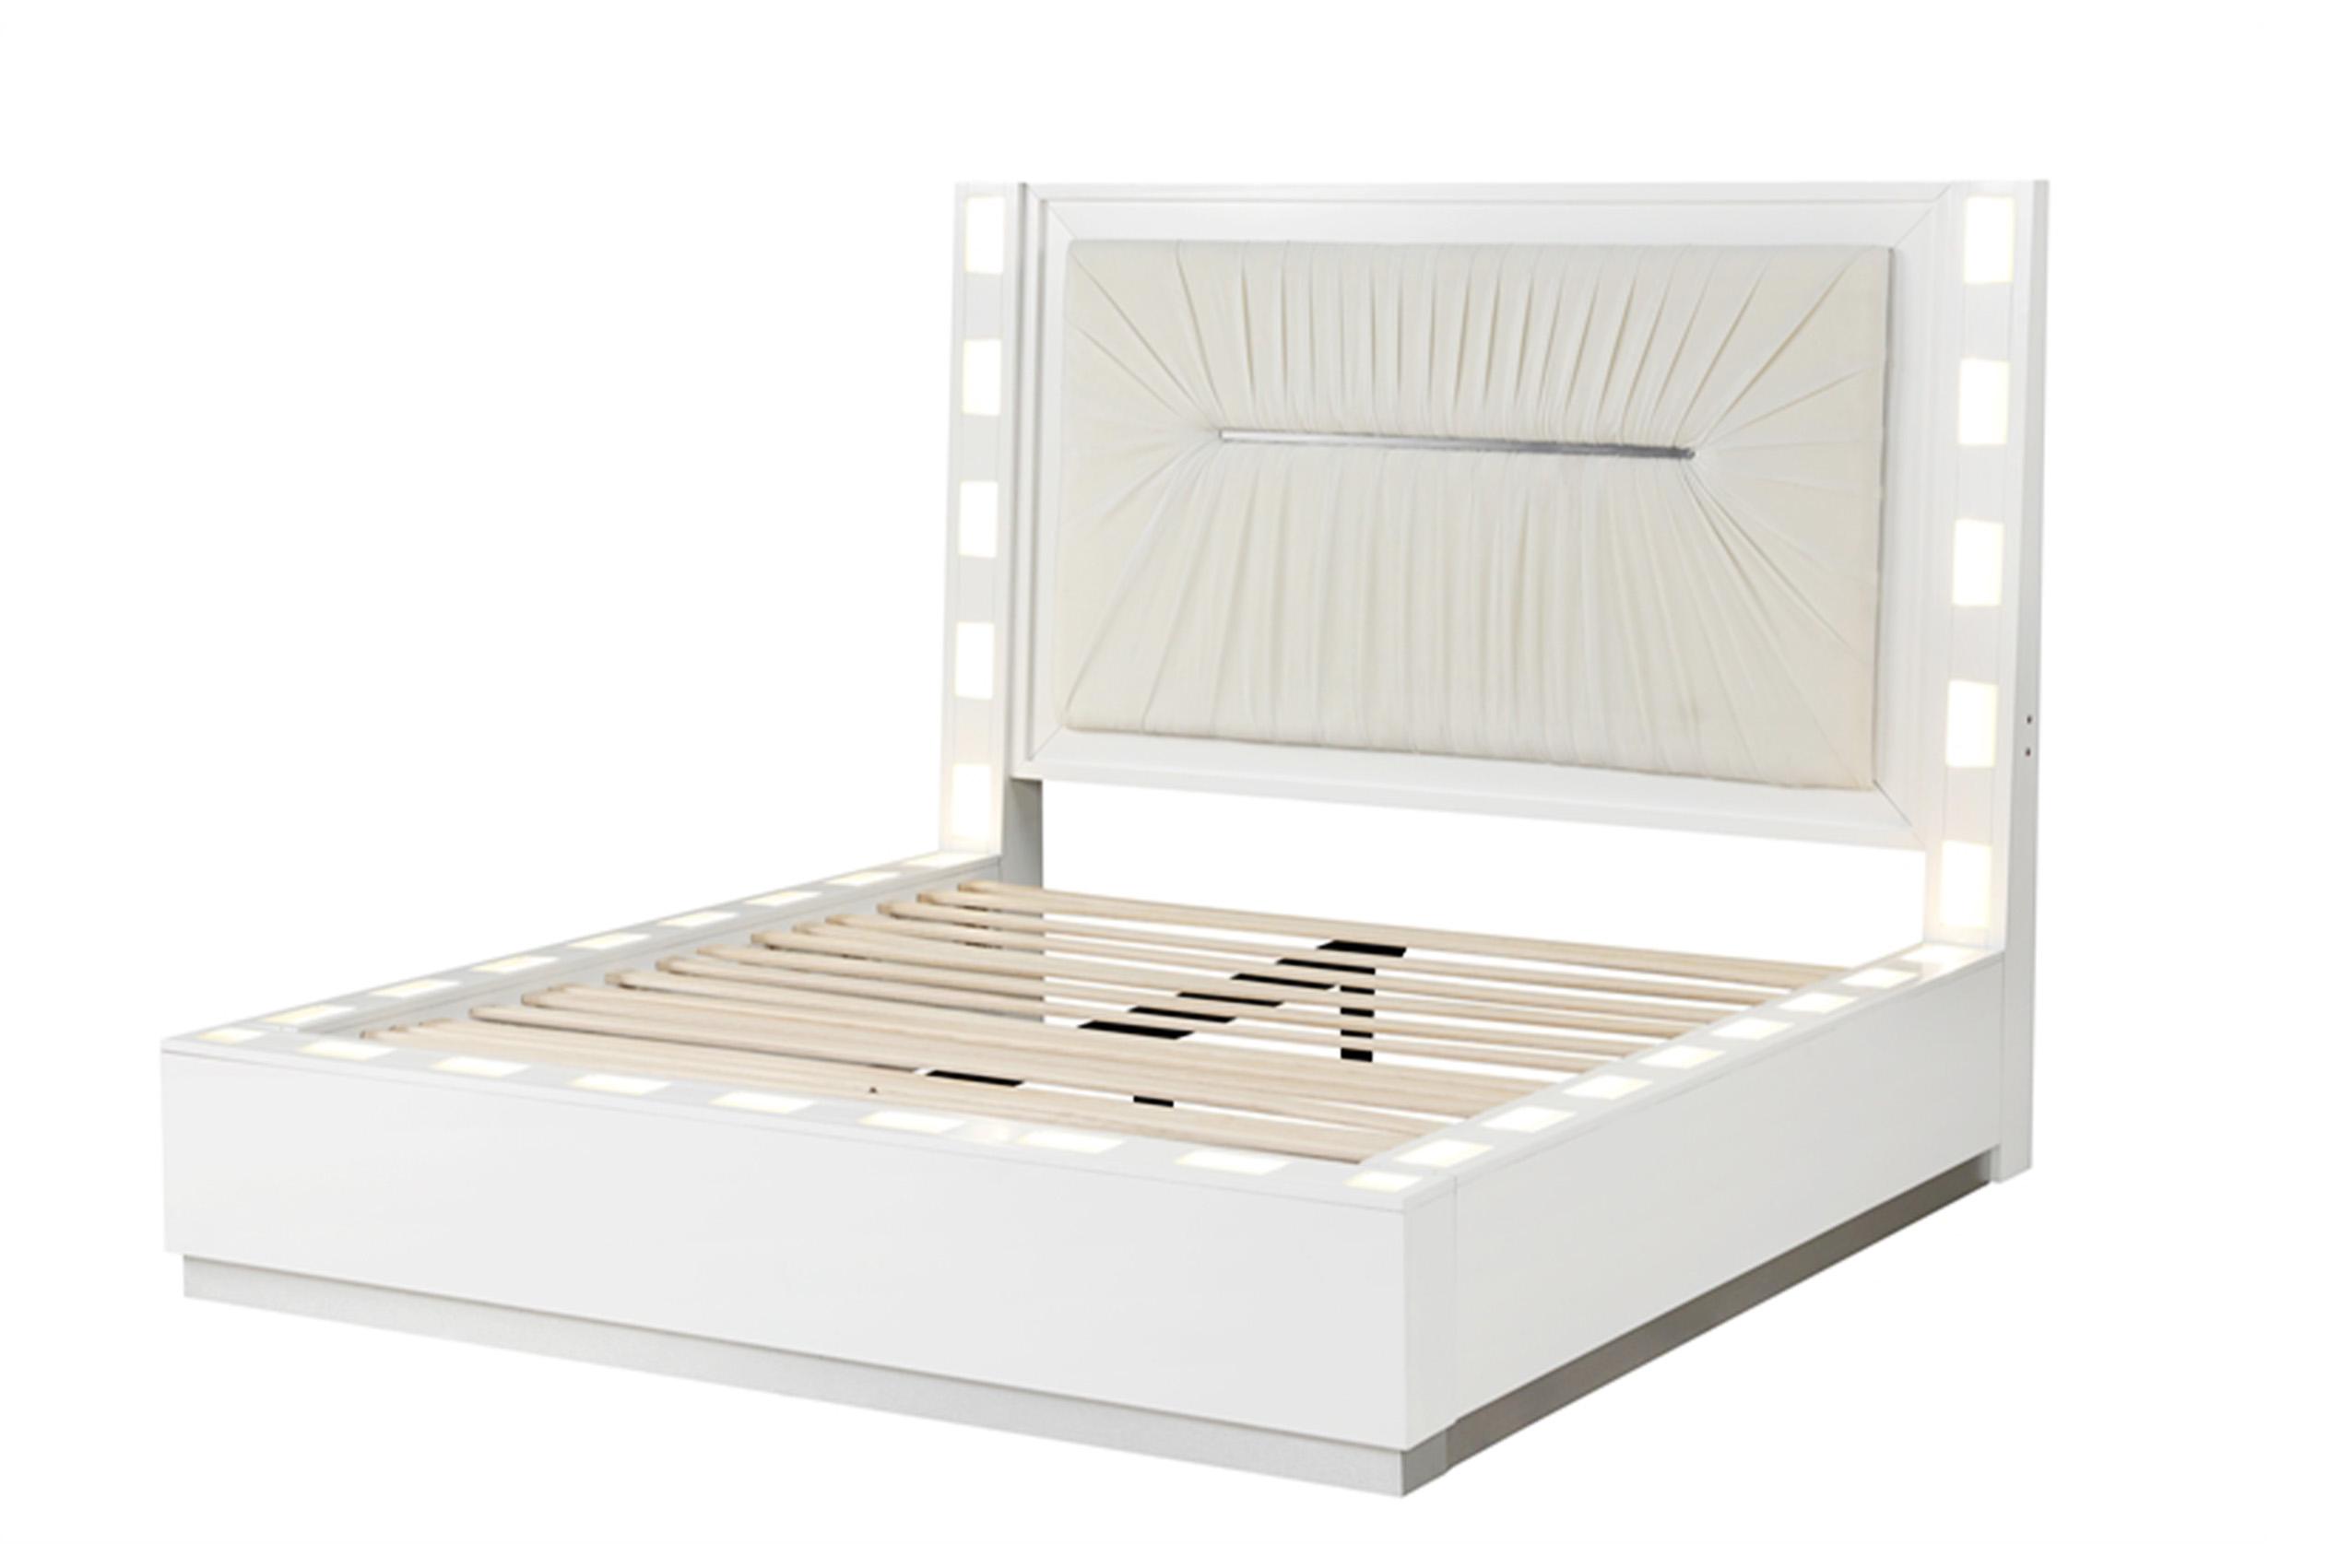 

    
Milky White Solid Wood King Bed COCO Galaxy Home Modern Contemporary
